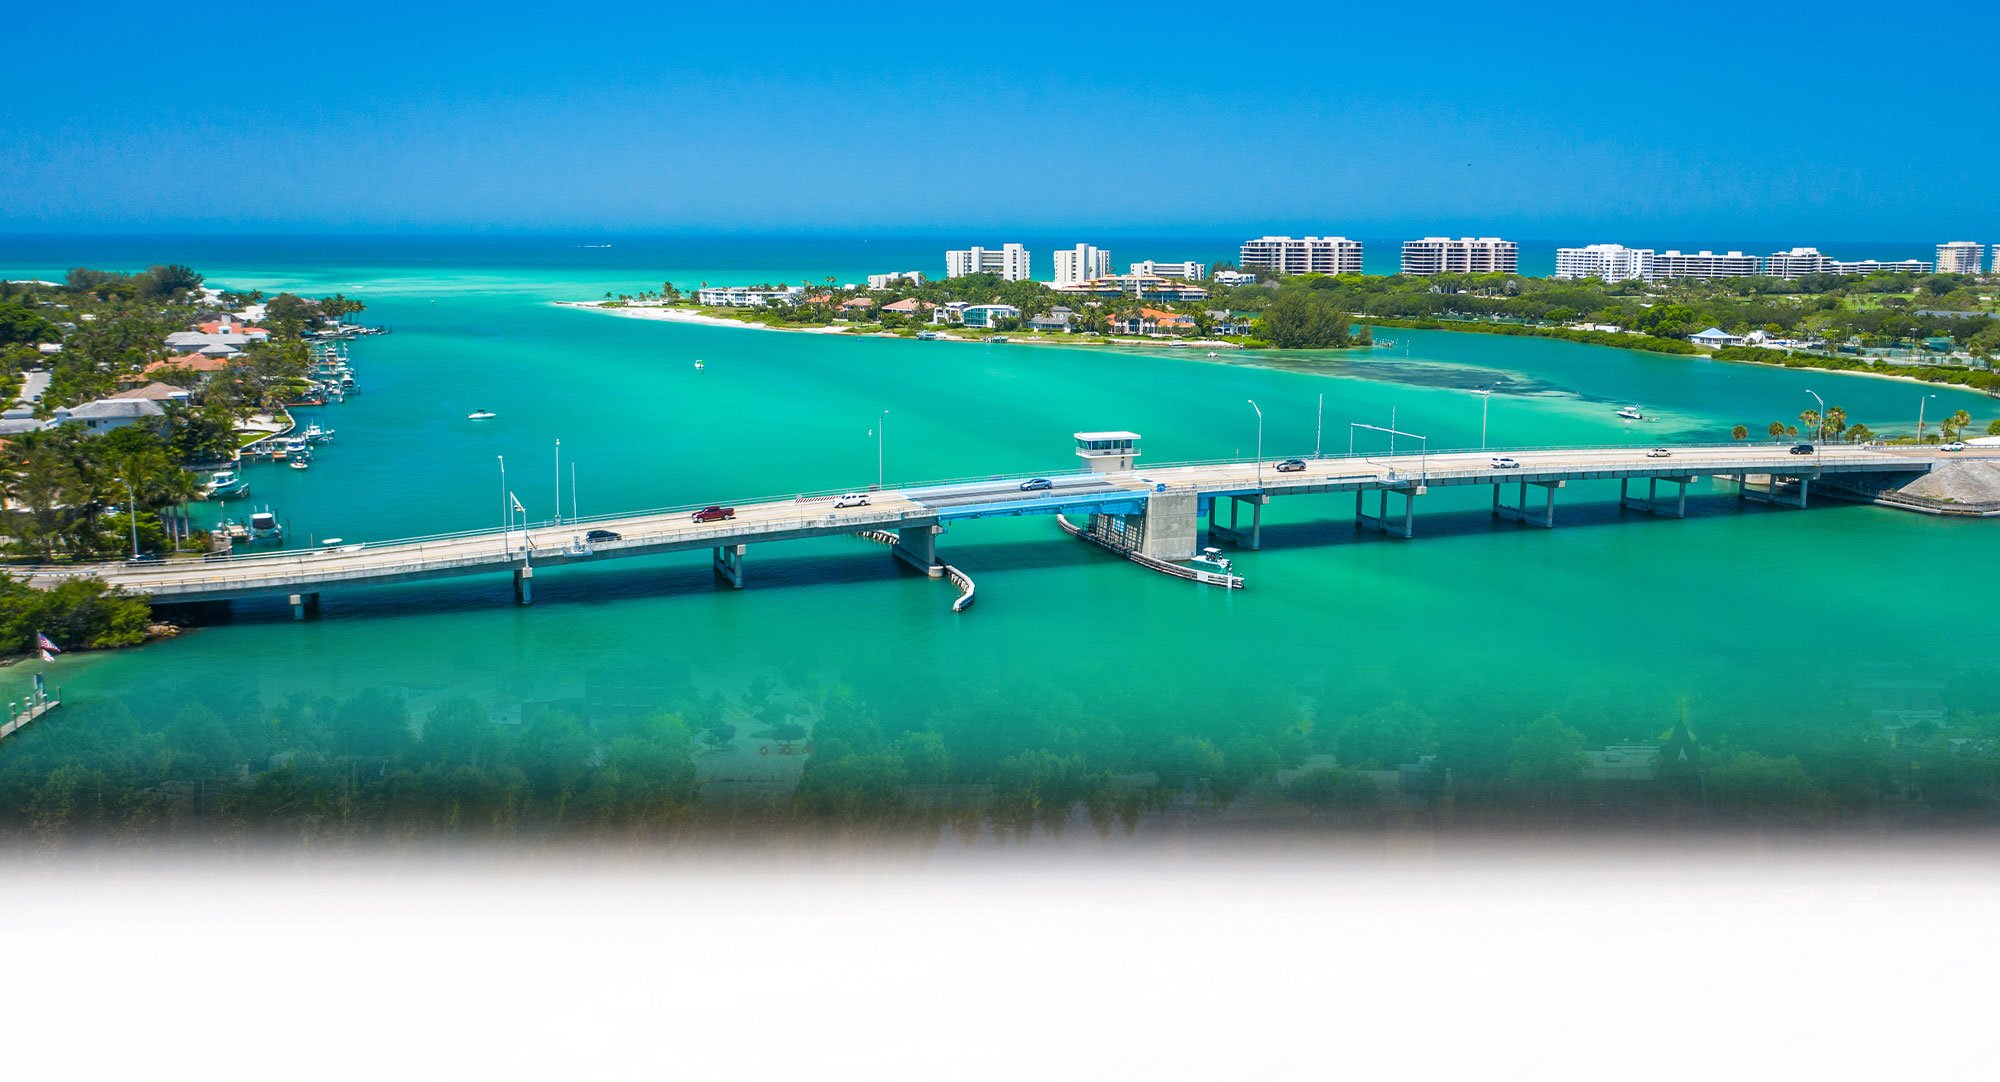 Cross Country Healthcare color photo of Sarasota, Florida with bridge over water in foreground.